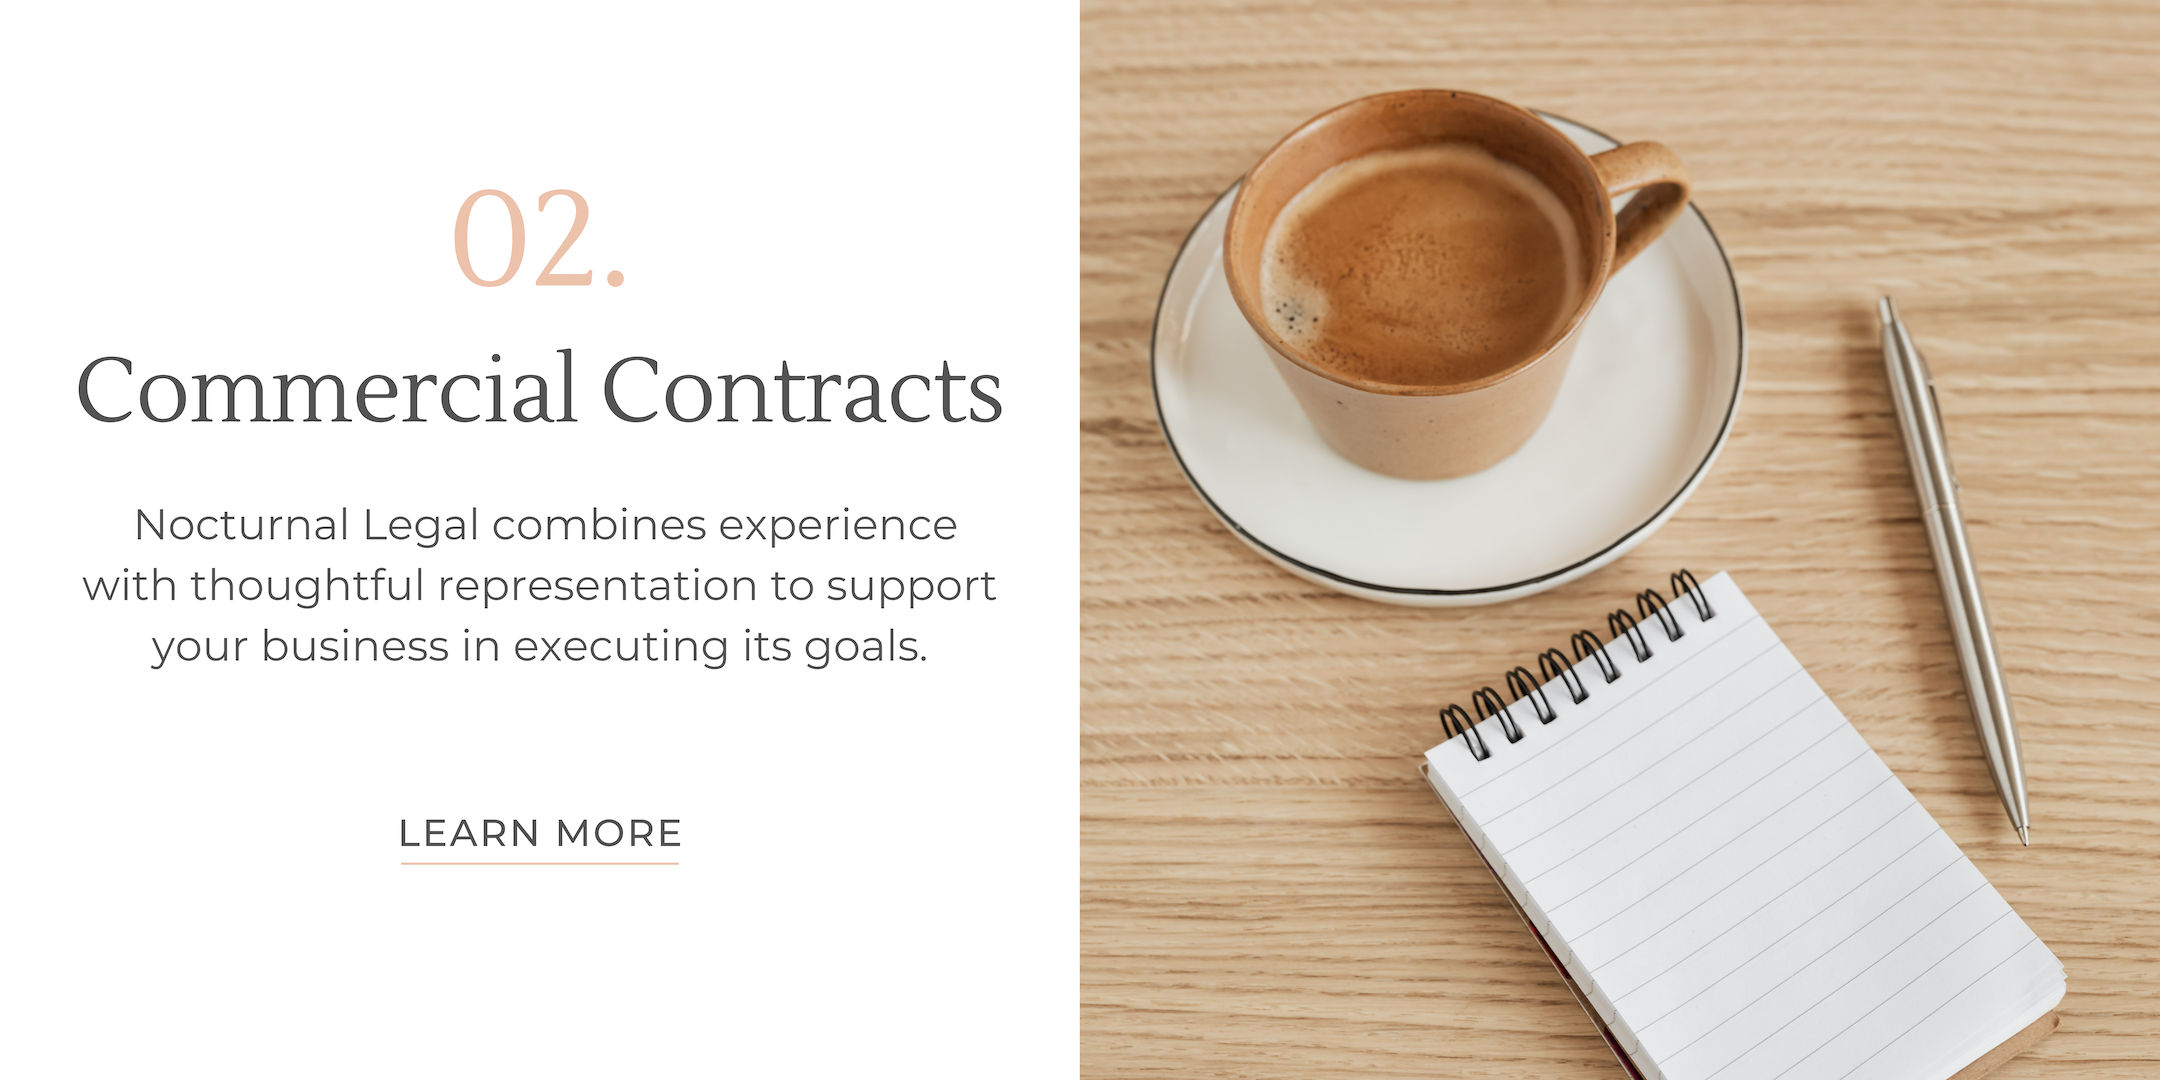 Need a contract attorney in Phoenix, Arizona? Nocturnal Legal offers commercial contract drafting and agreement negotiation services for business of all sizes from startups top fortune 500 companies.